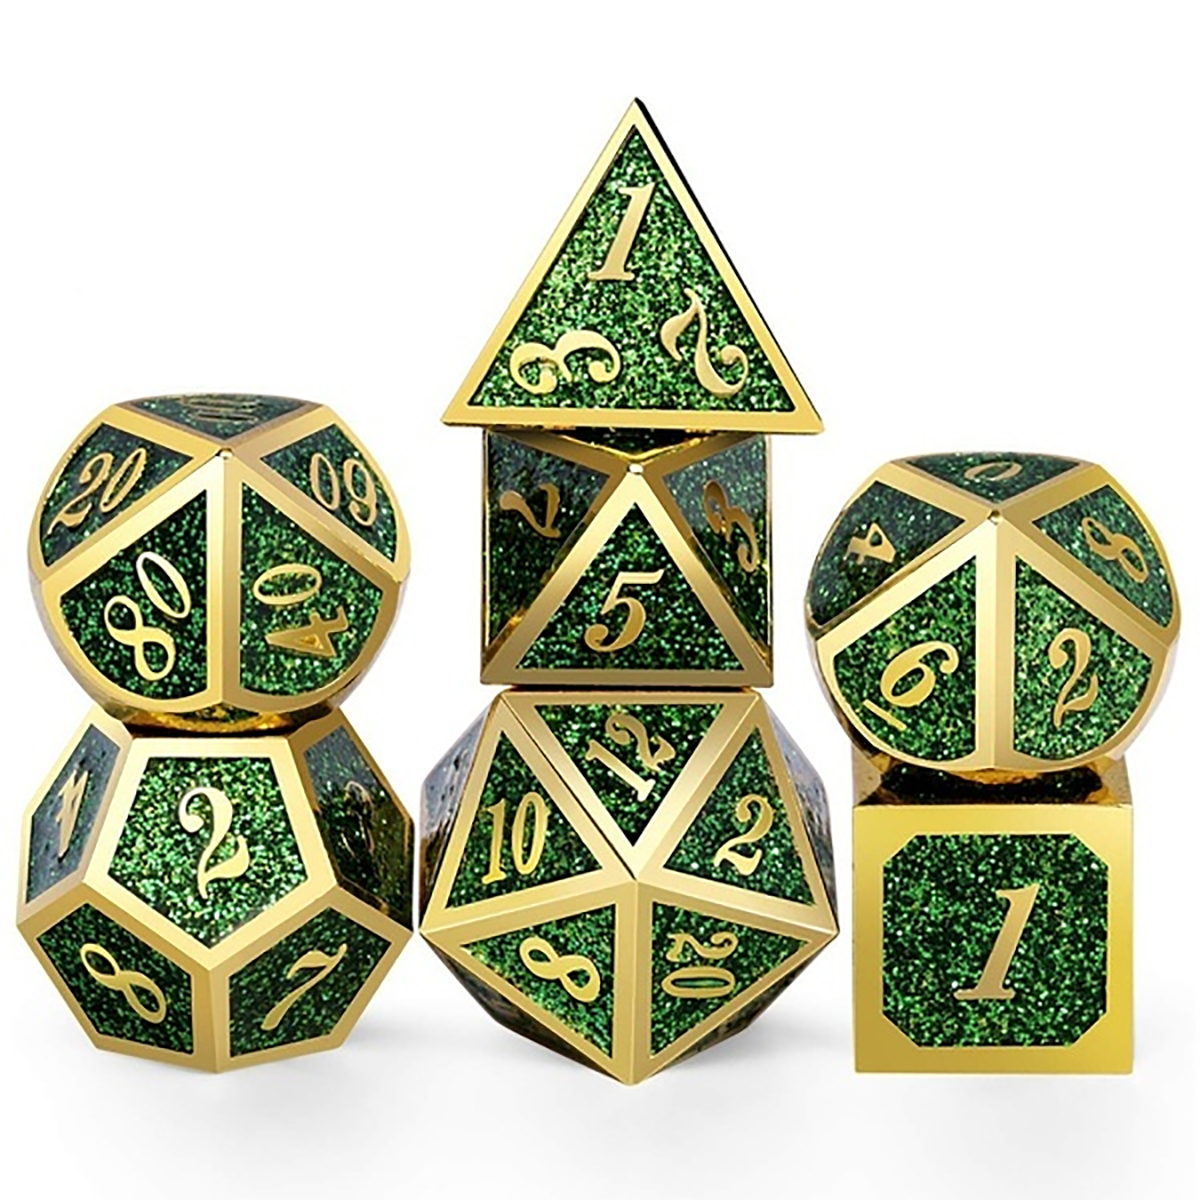 7-PcsSet-Metal-Dice-Set-Role-Playing-Dragons-Table-Board-Game-Toys-With-Cloth-Bag-Bar-Party-Game-Dic-1672532